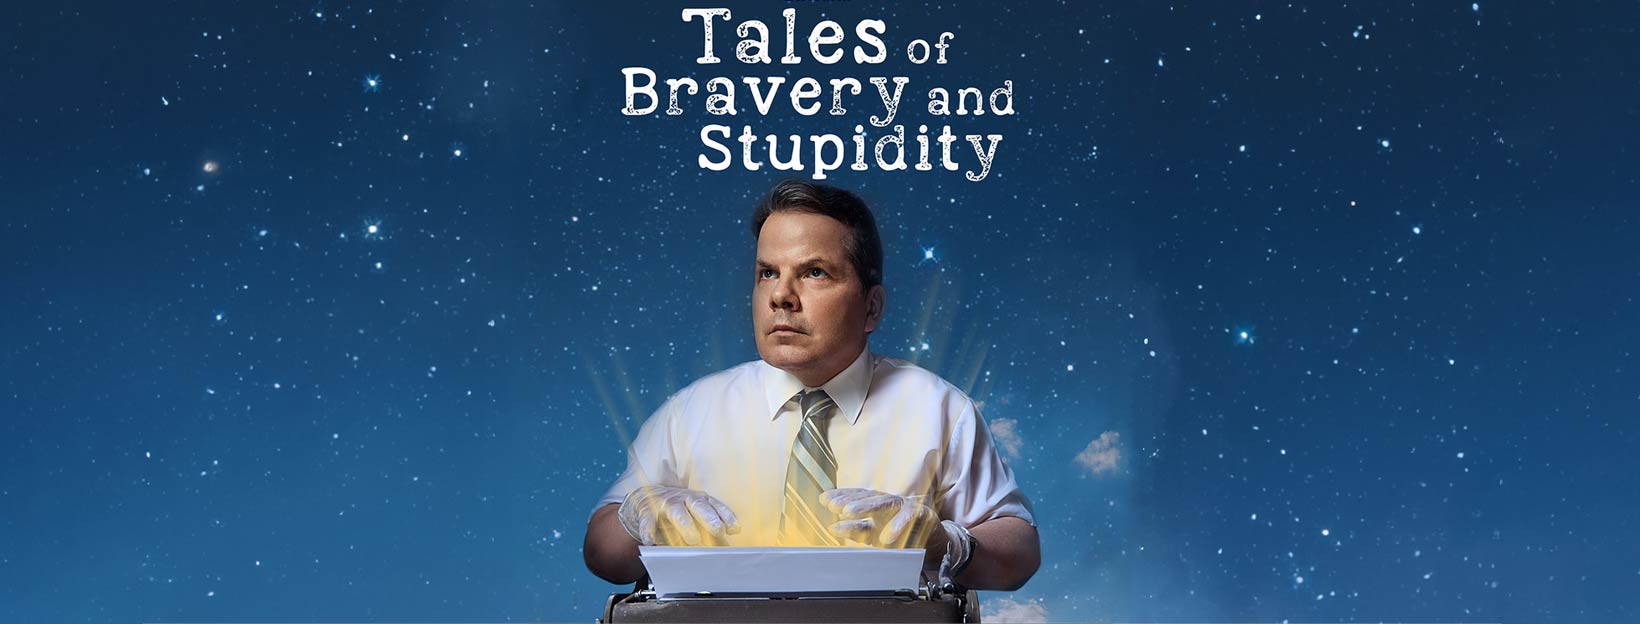 Algonquin Students' Association  Bruce McCulloch's Tales of Bravery and  Stupidity - Algonquin Commons Theatre